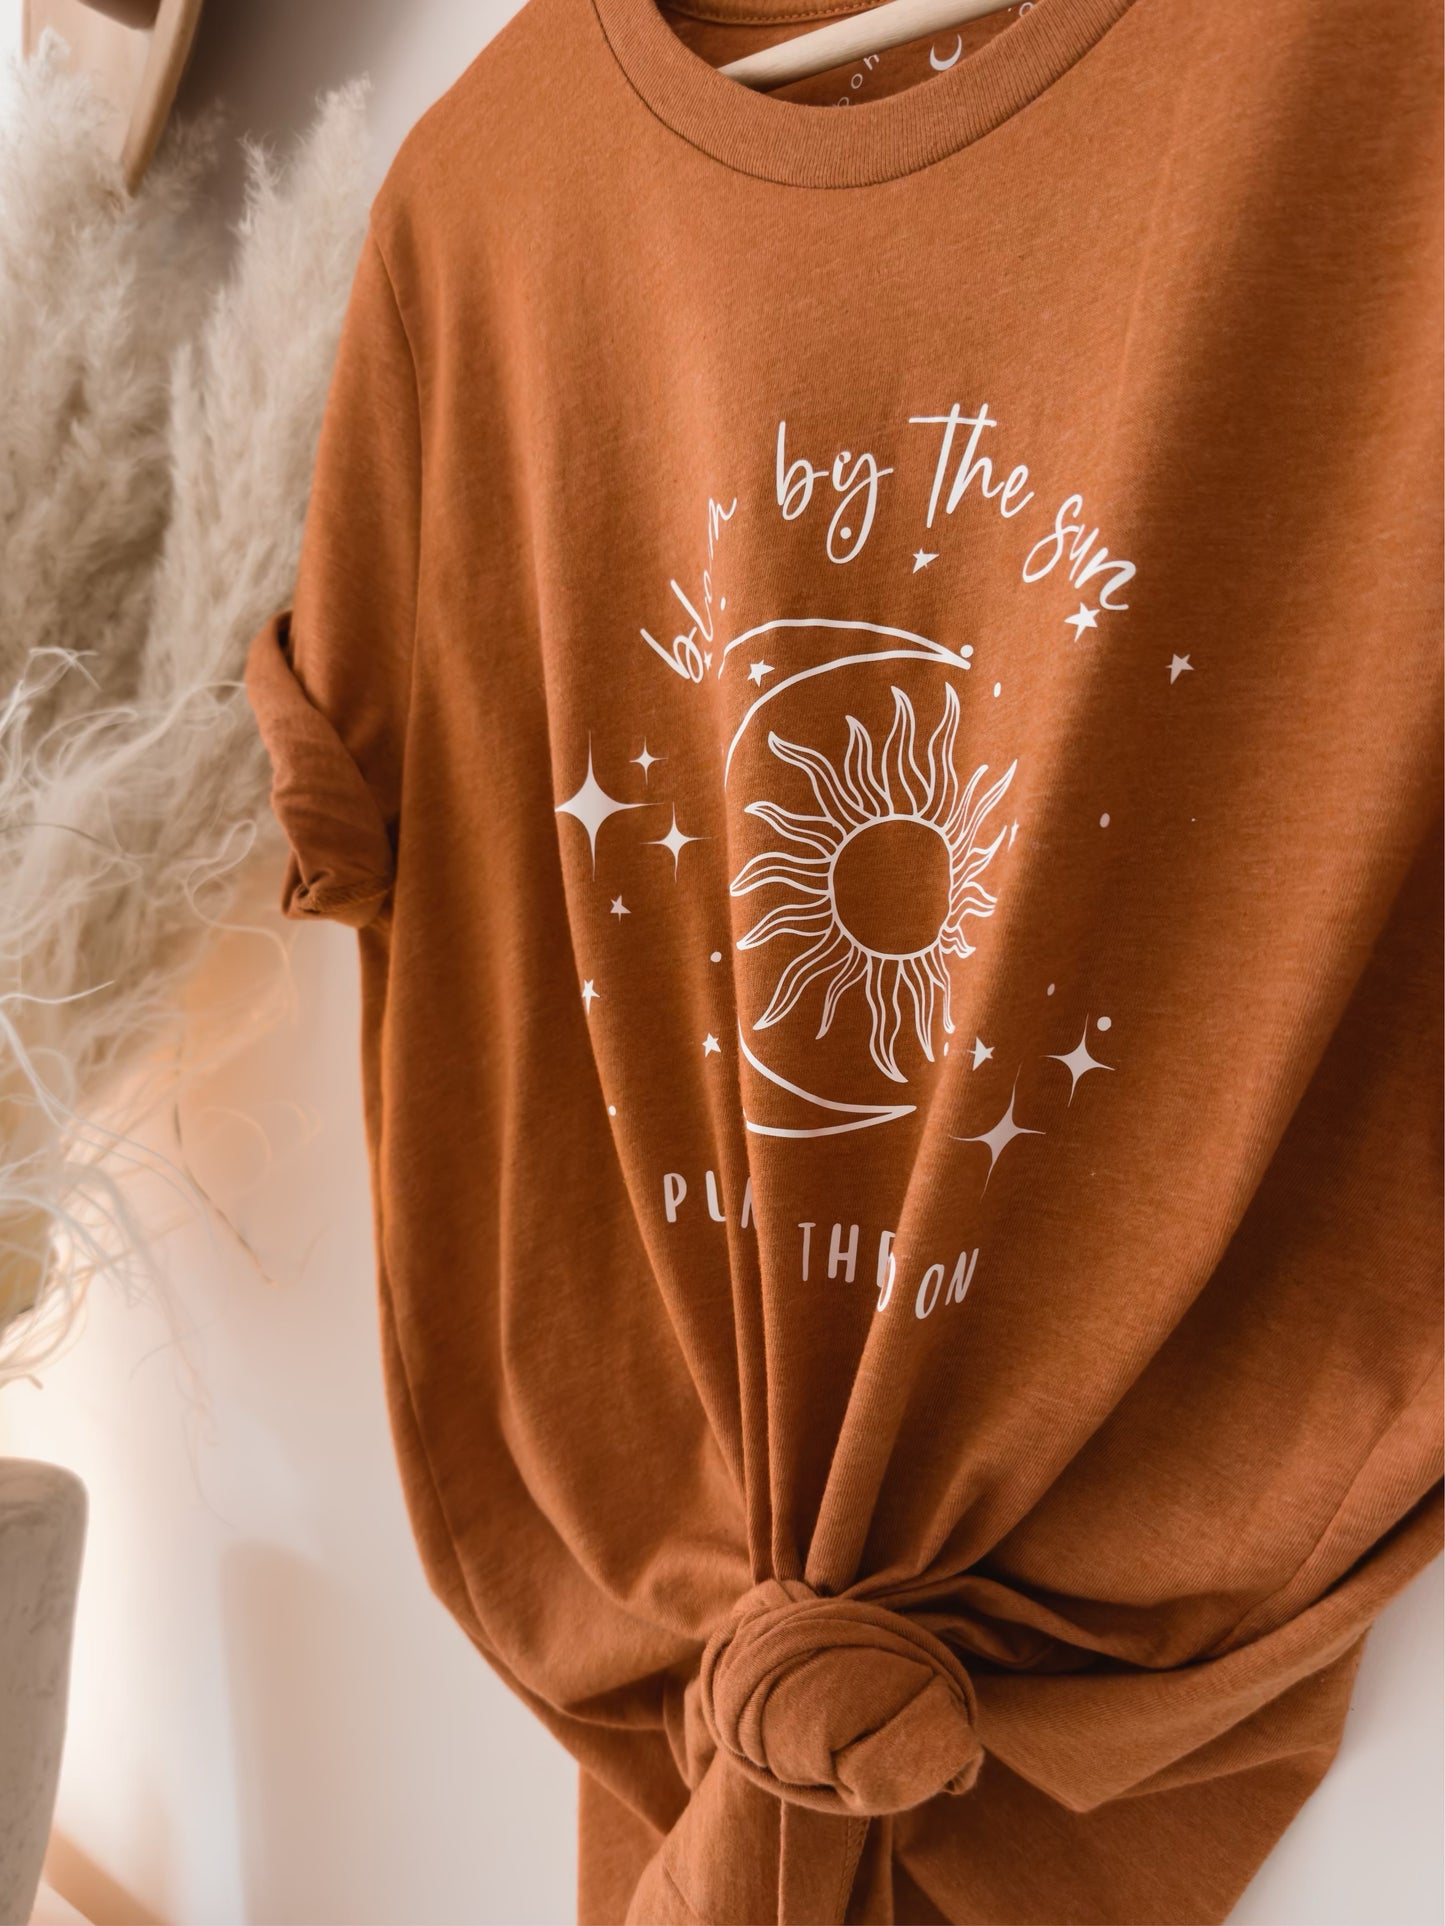 Plant by the Moon | t-shirt